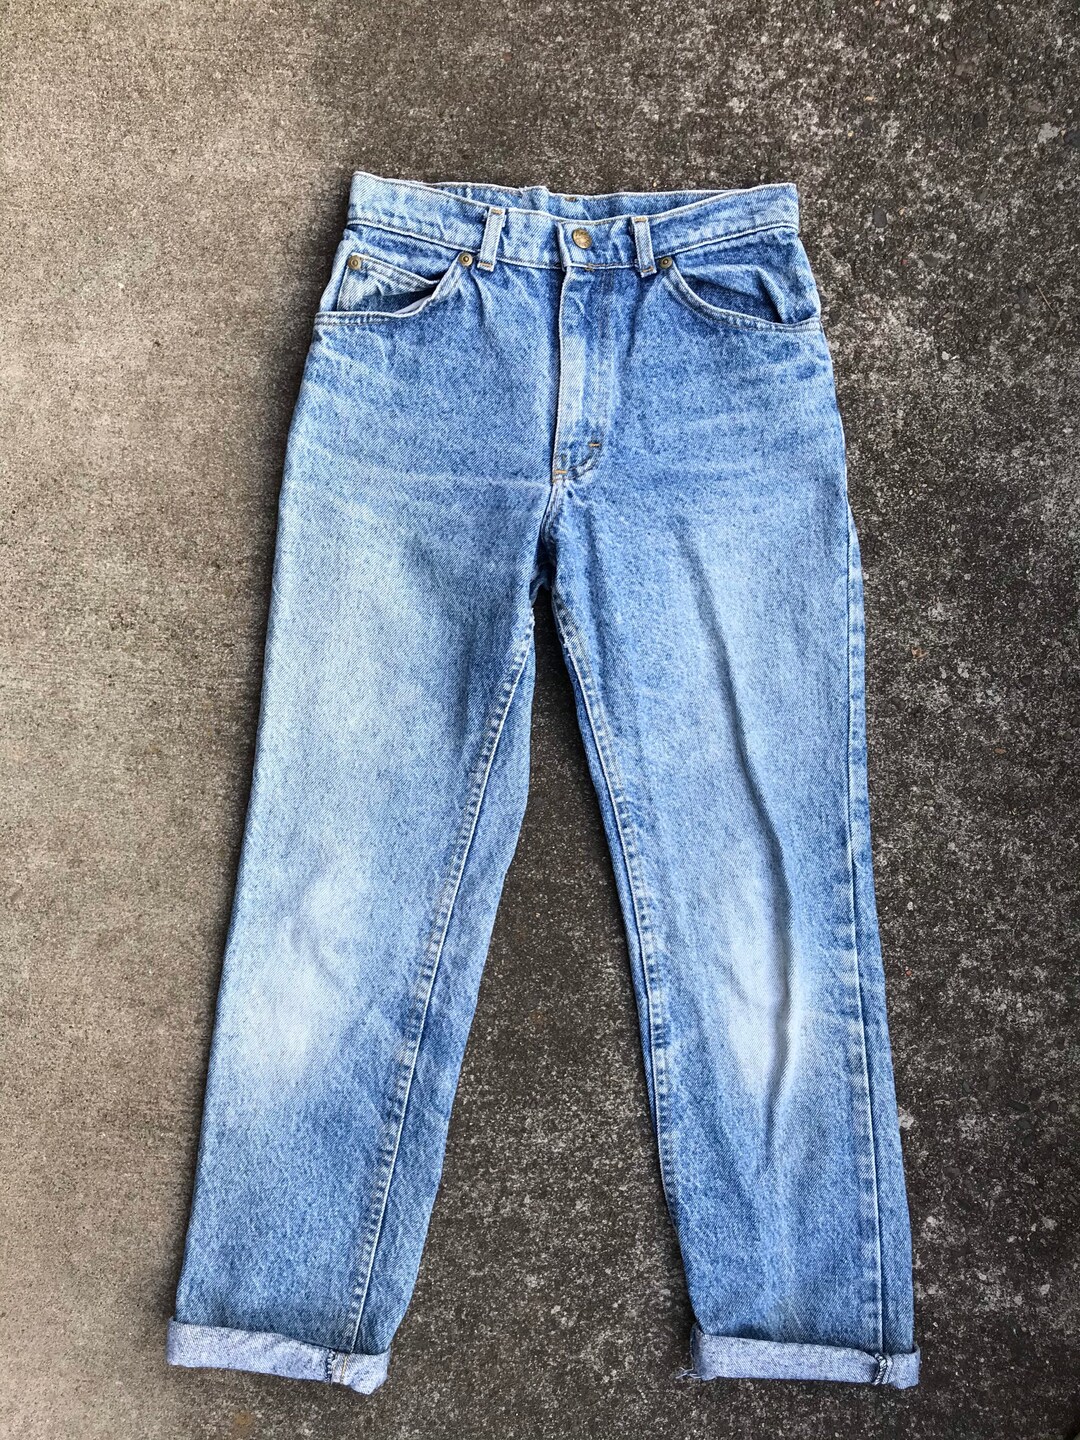 80s Womens Lee Jeans Vintage High Waisted Denim Distressed - Etsy